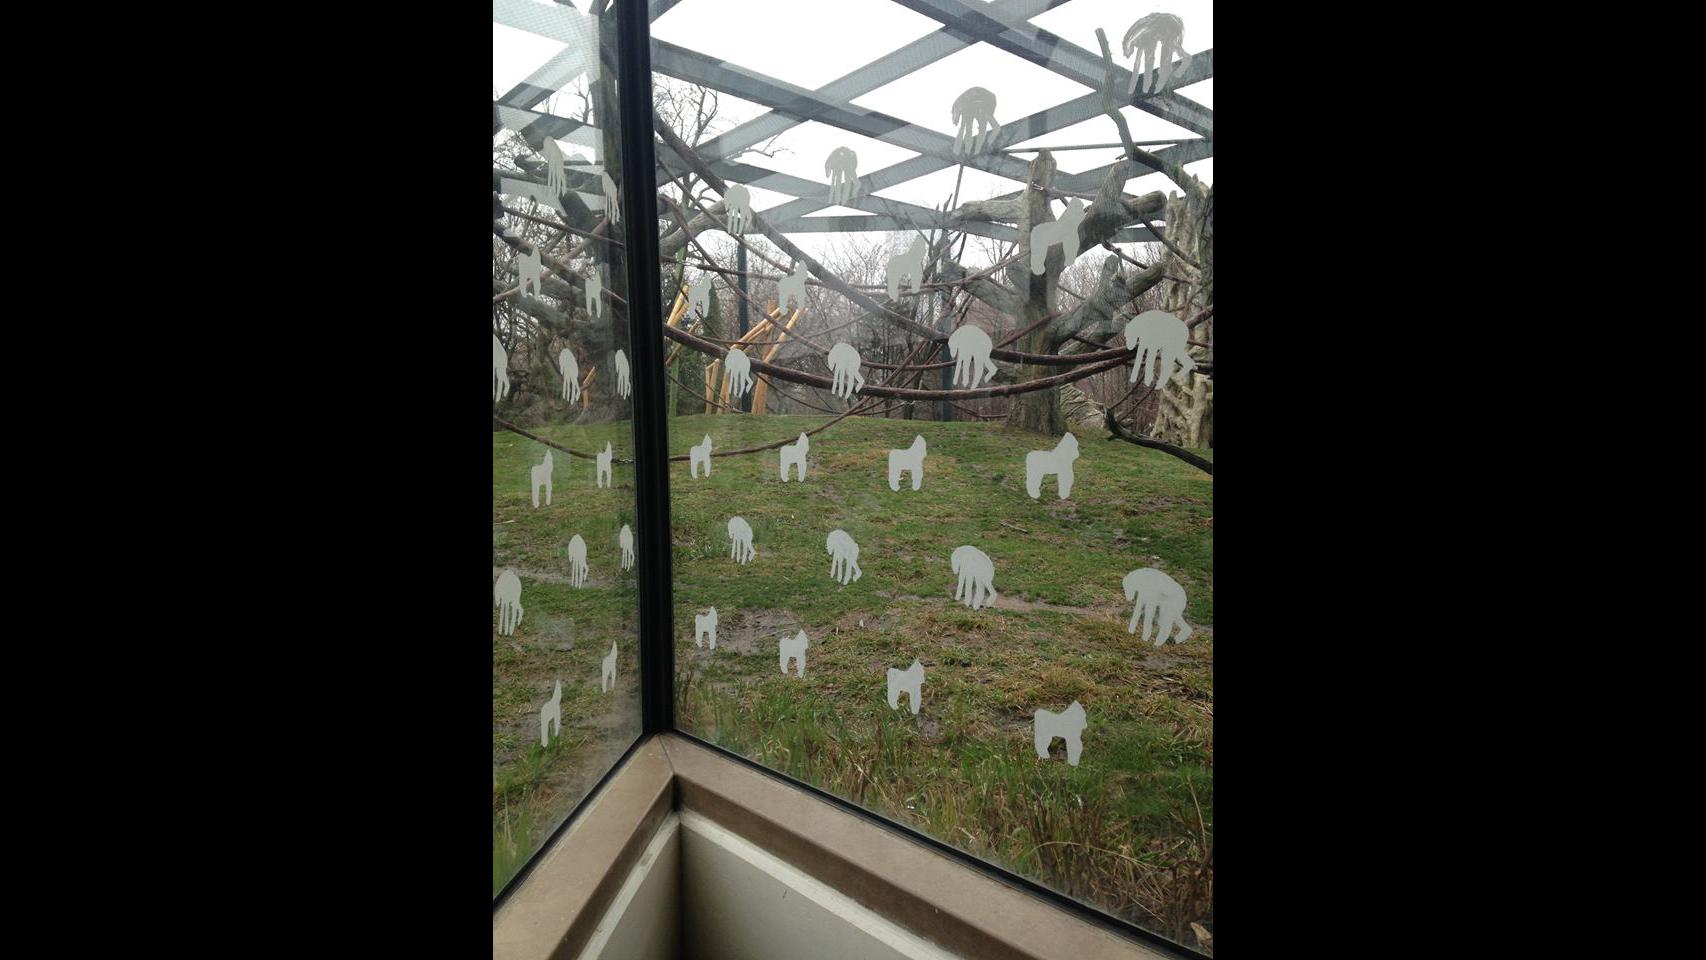 Decals of great apes cover a viewing wall at Lincoln Park Zoo. (Courtesy Lincoln Park Zoo)